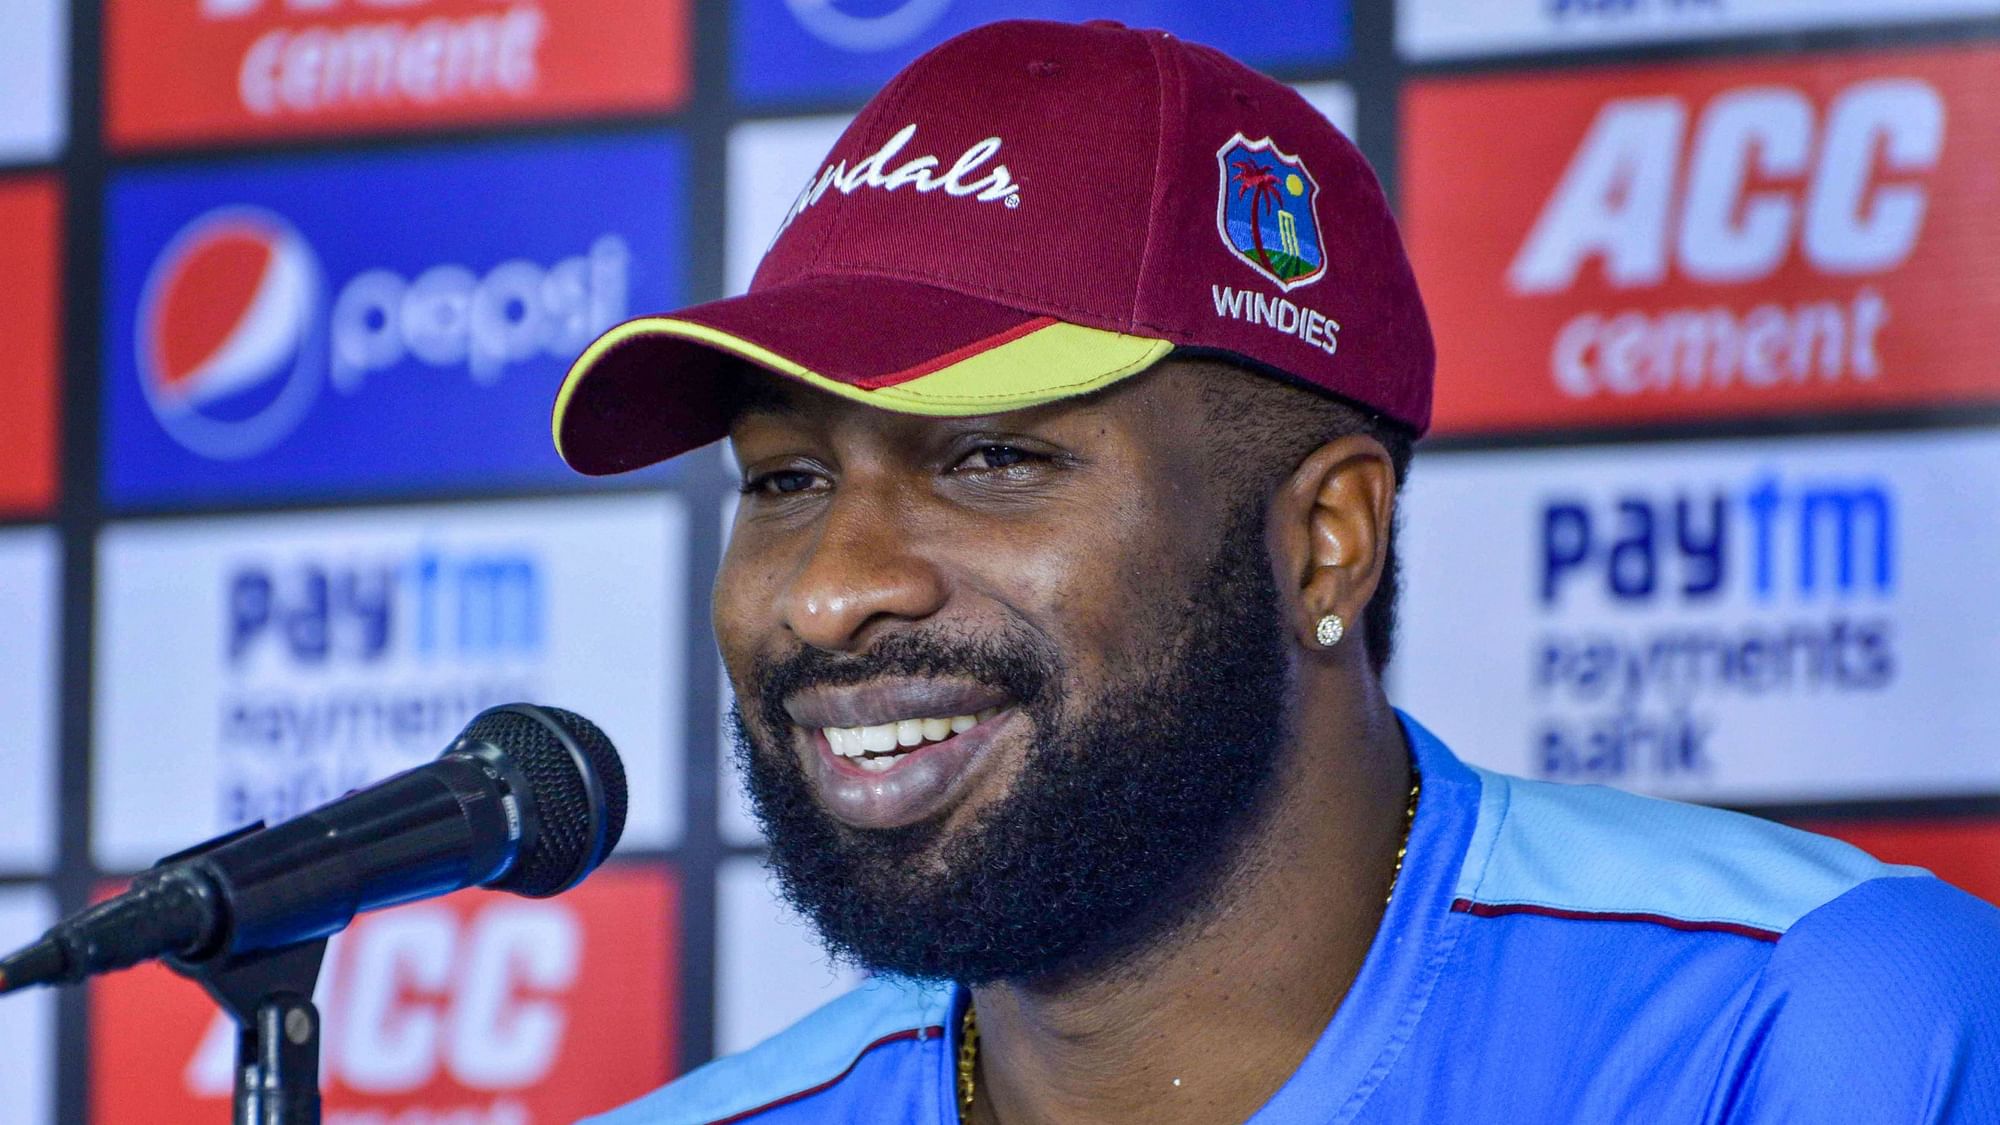 Pollard said young cricketers in his country need to be protected from the “vultures of the game”.